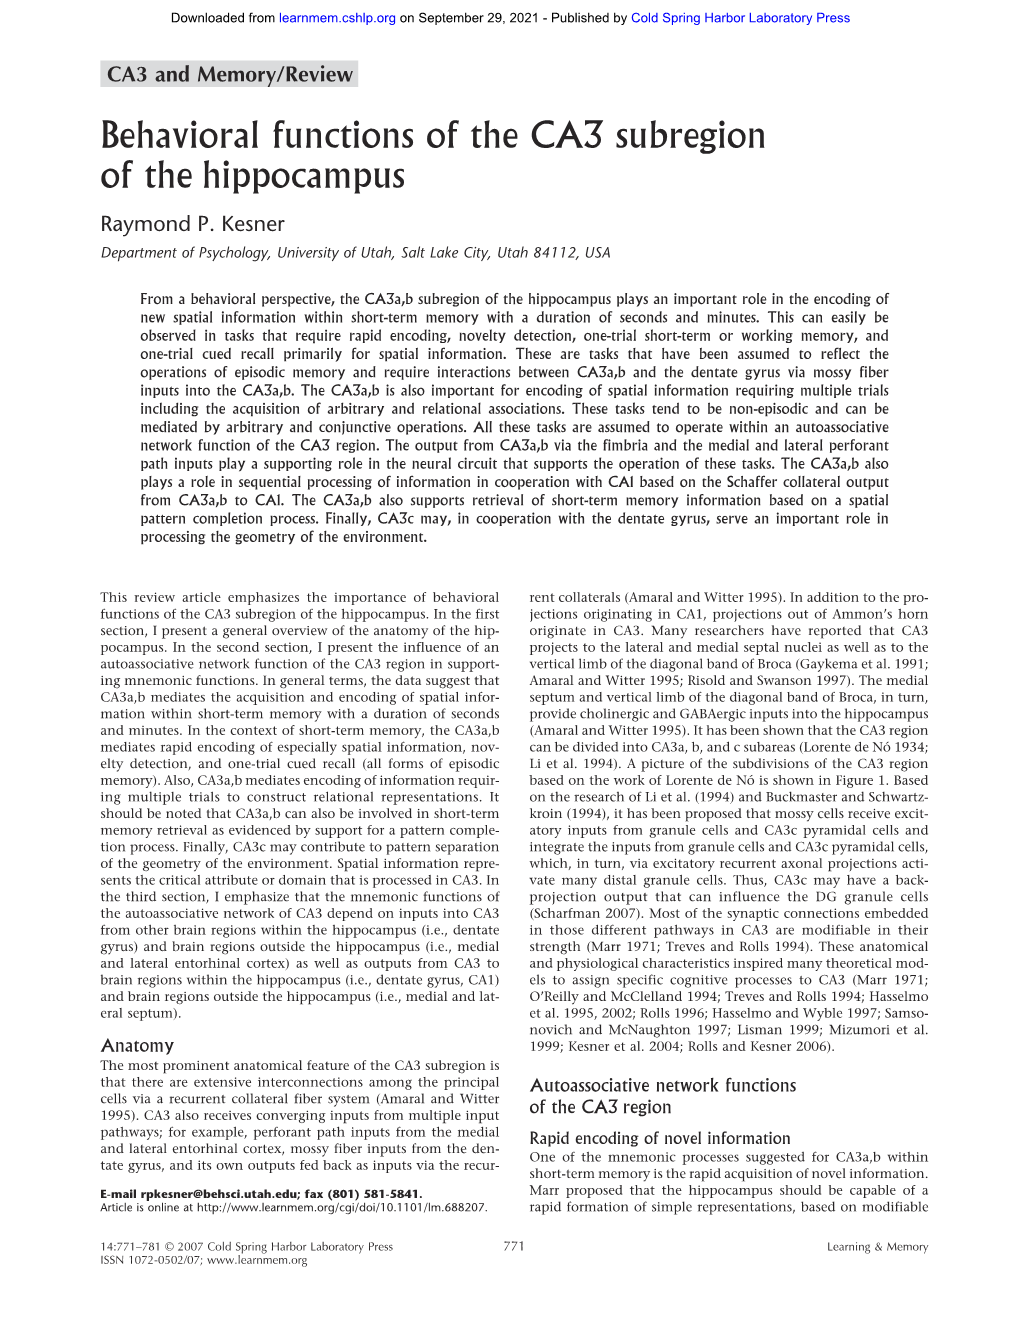 Behavioral Functions of the CA3 Subregion of the Hippocampus Raymond P